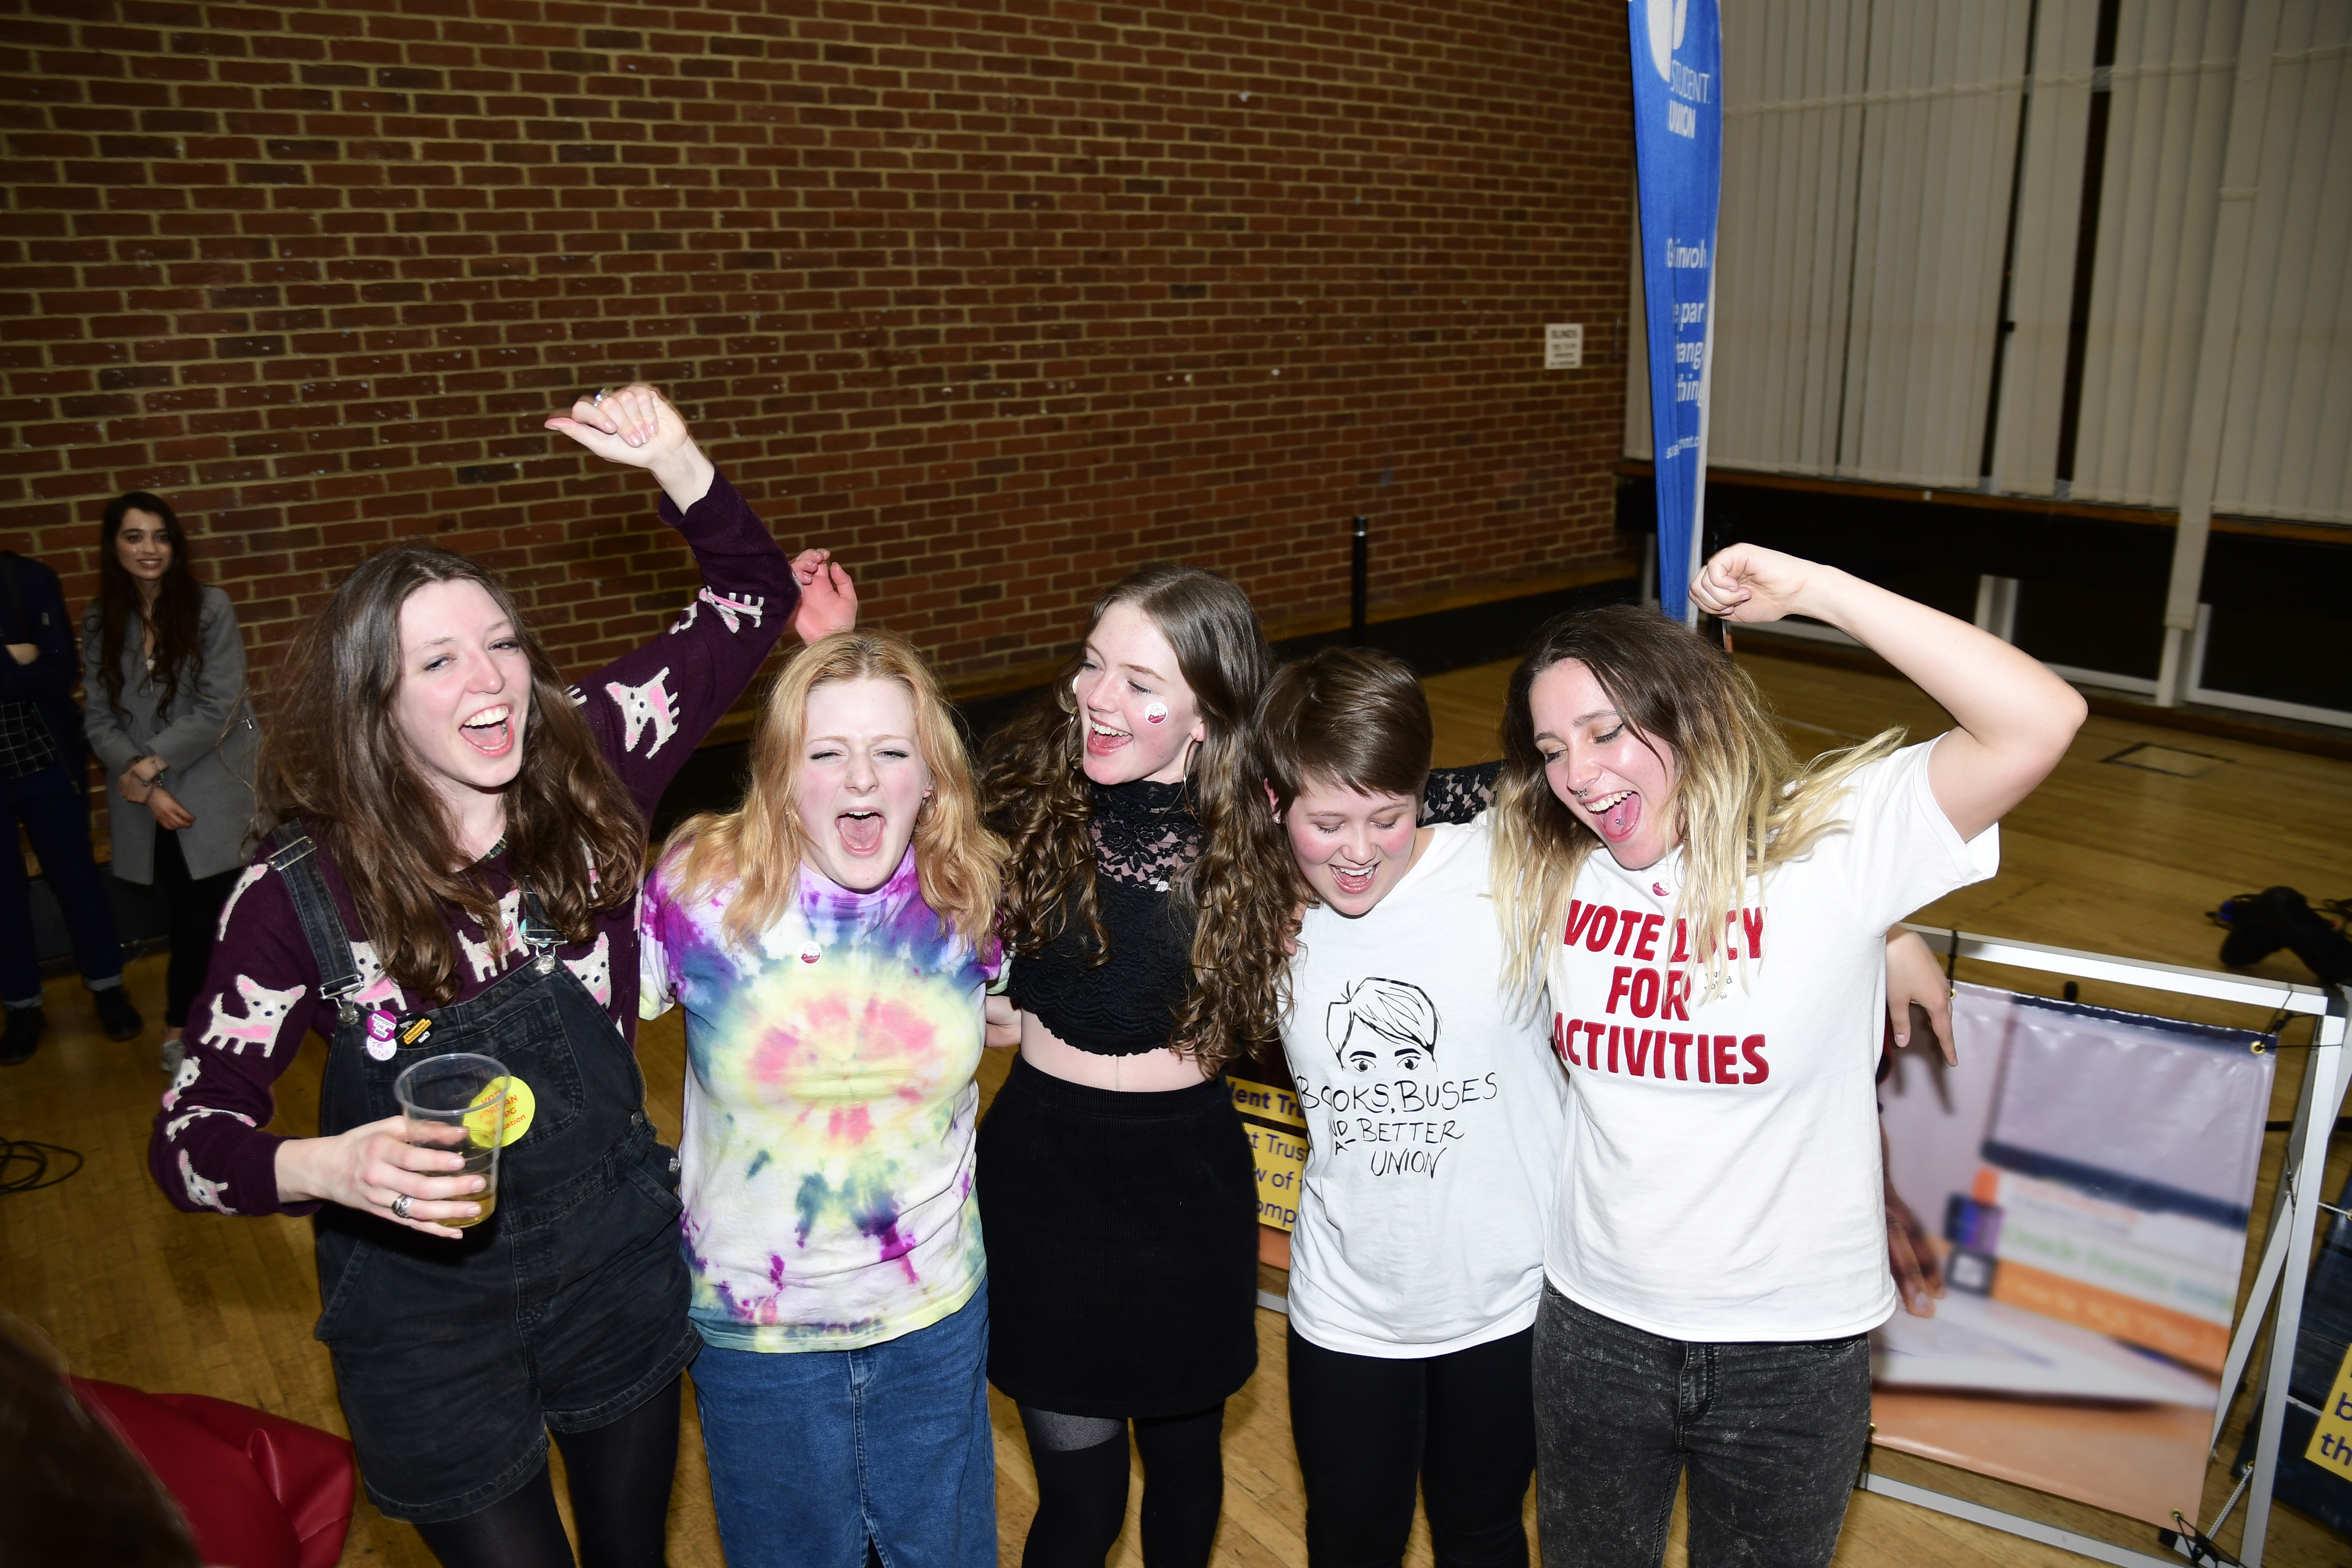 Sussex Student's union 2017 election winners